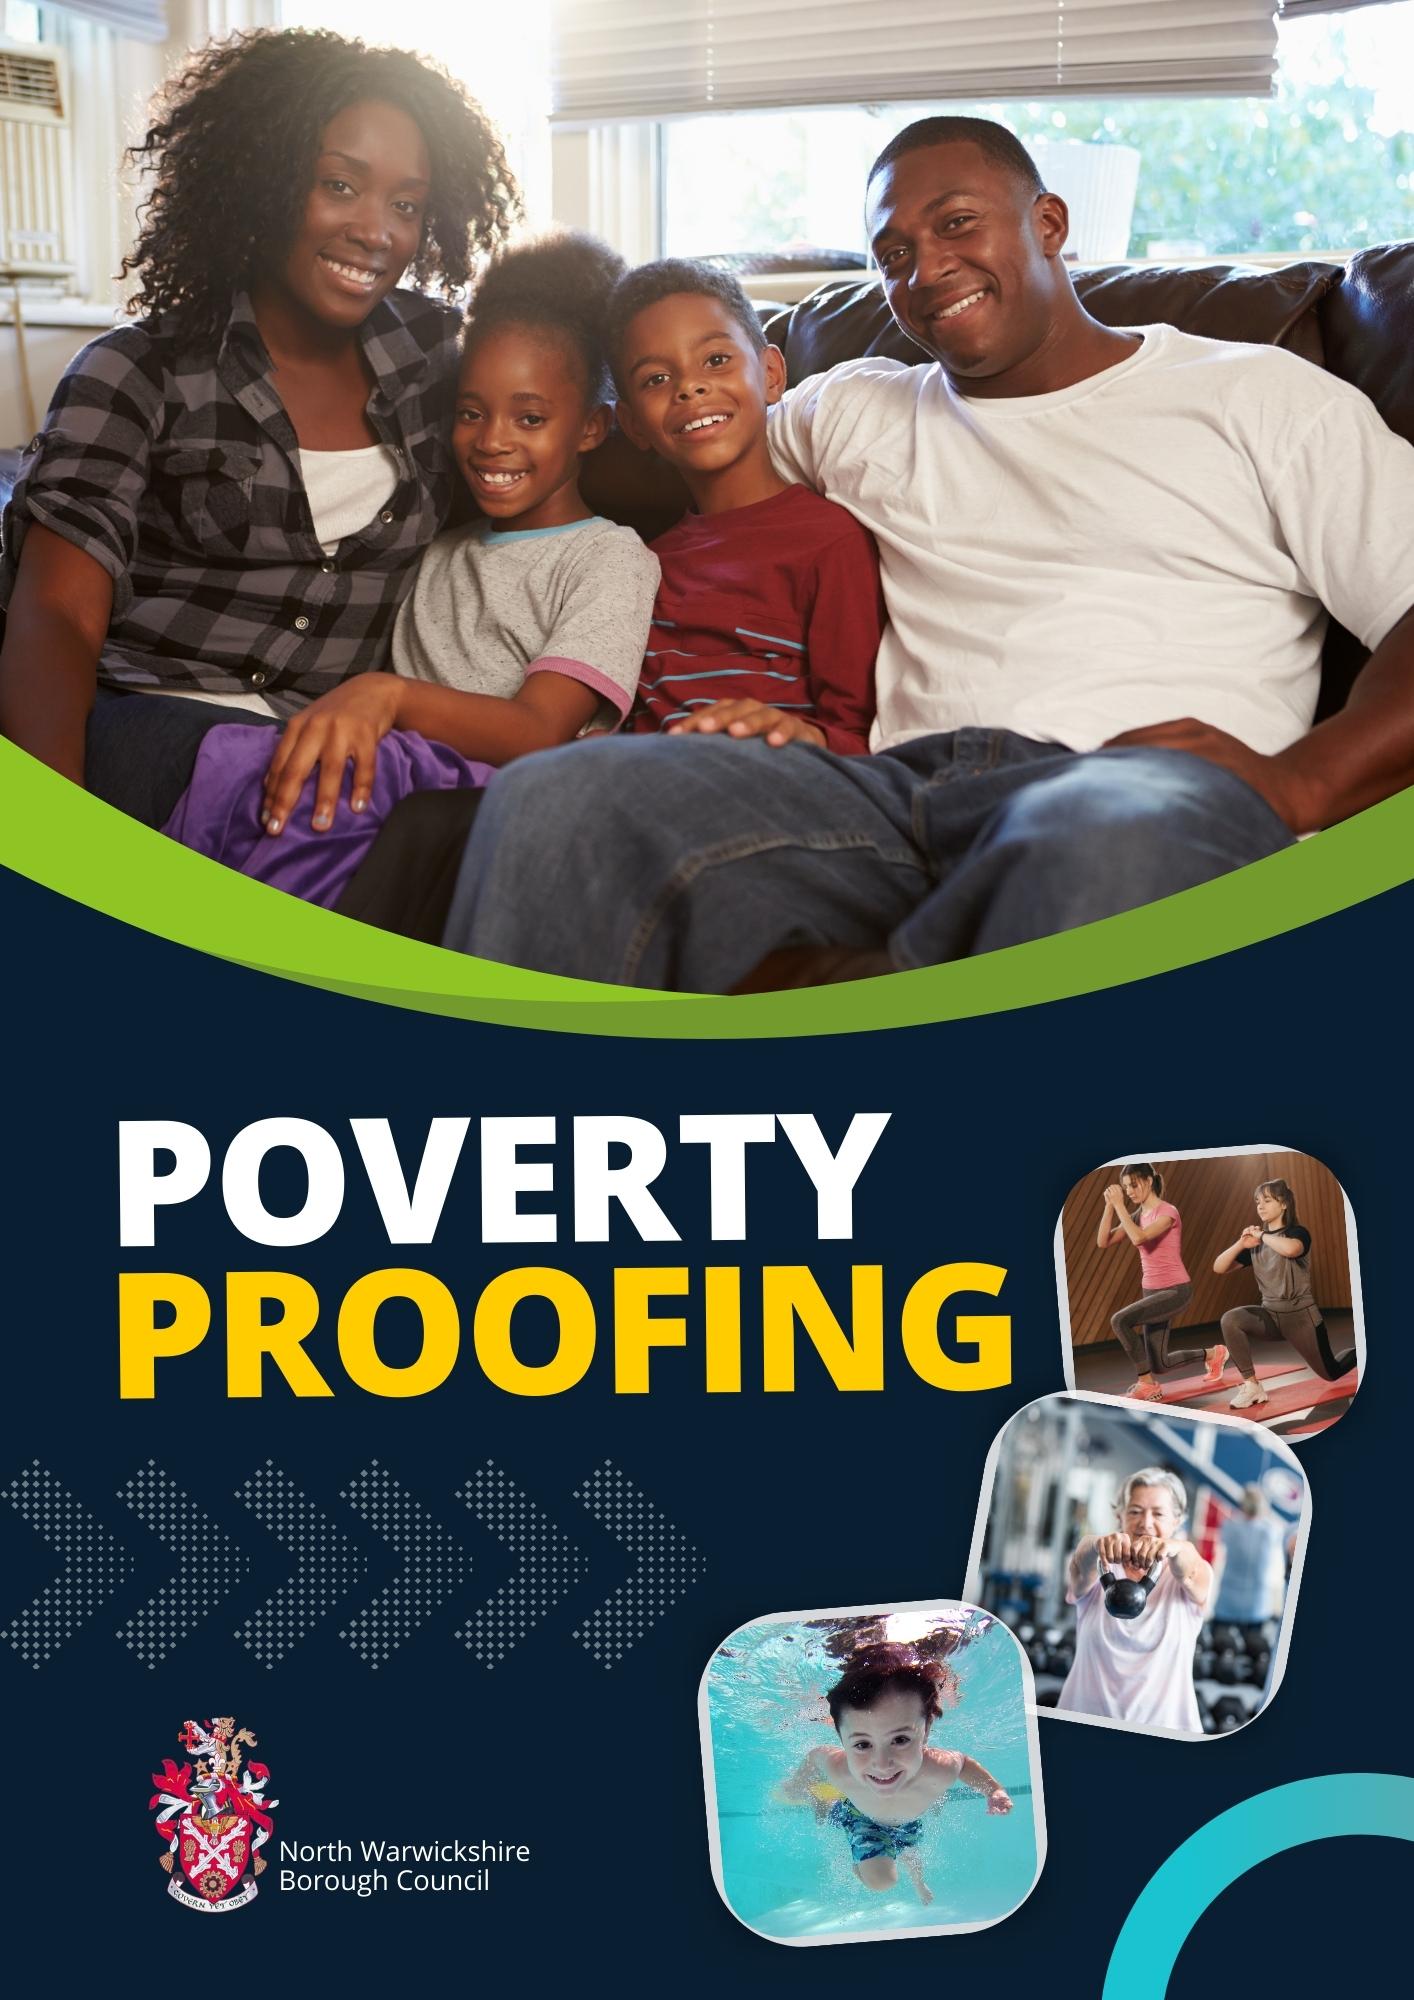 poverty proofing image